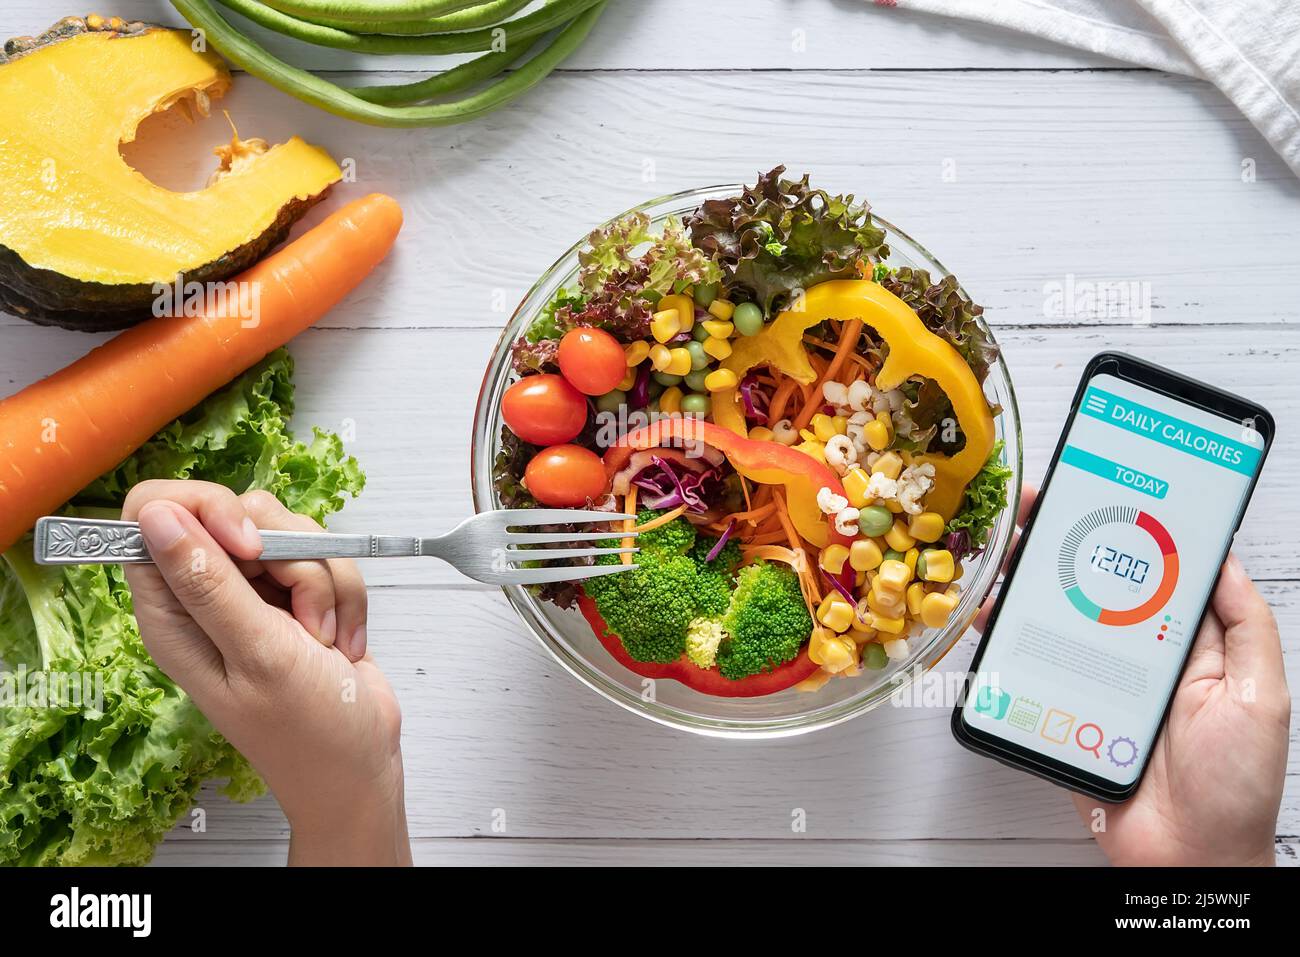 Calories counting , diet , food control and weight loss concept. Calorie counter application on smartphone screen at dining table with salad, fruit Stock Photo